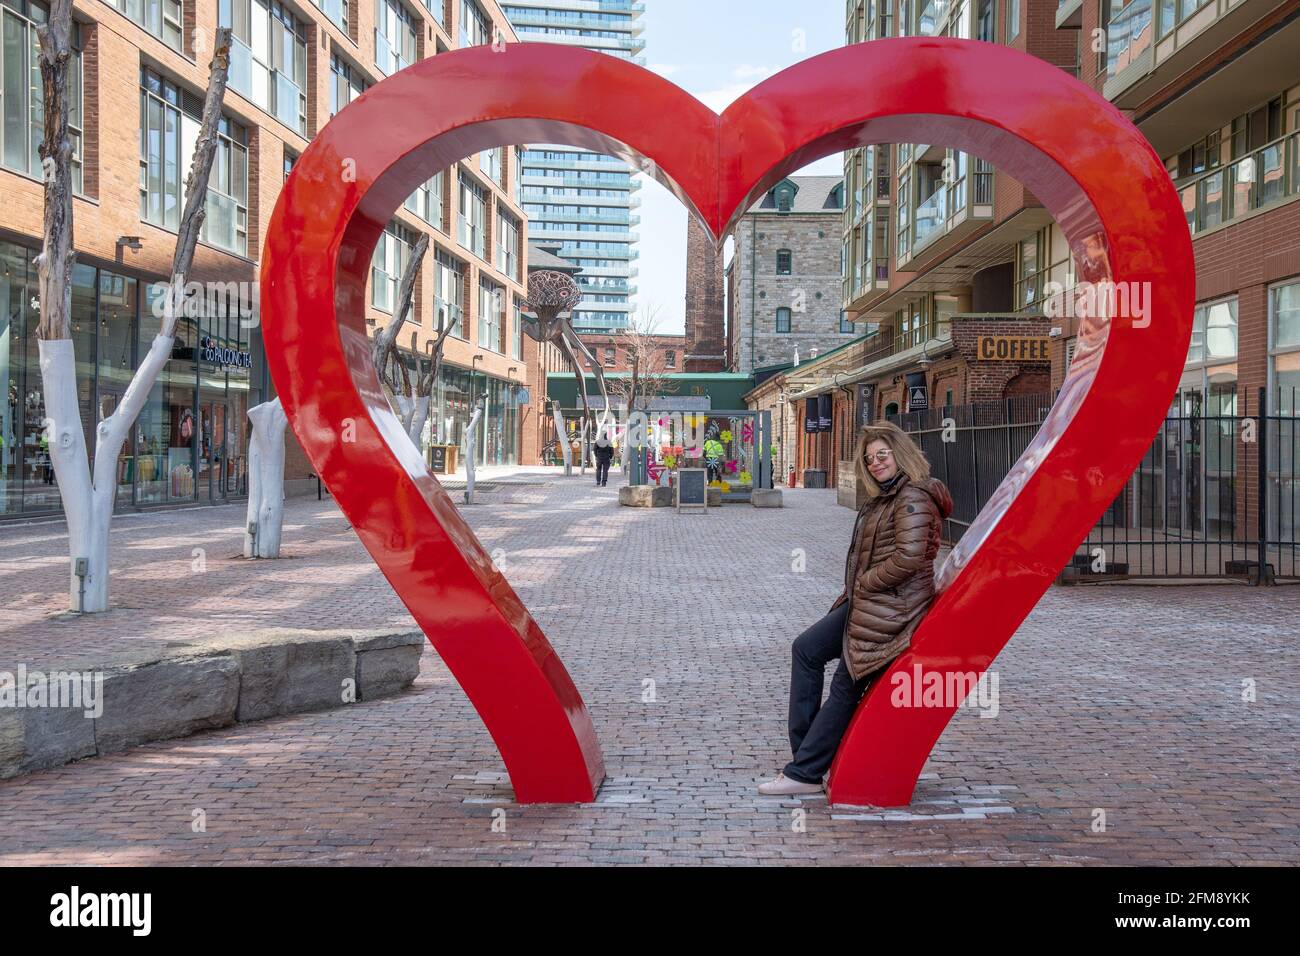 Portrait of a real middle woman of Latin American ethnicity in the Distillery District in the Old Town of Toronto, Canada. The image shows the sculptu Stock Photo